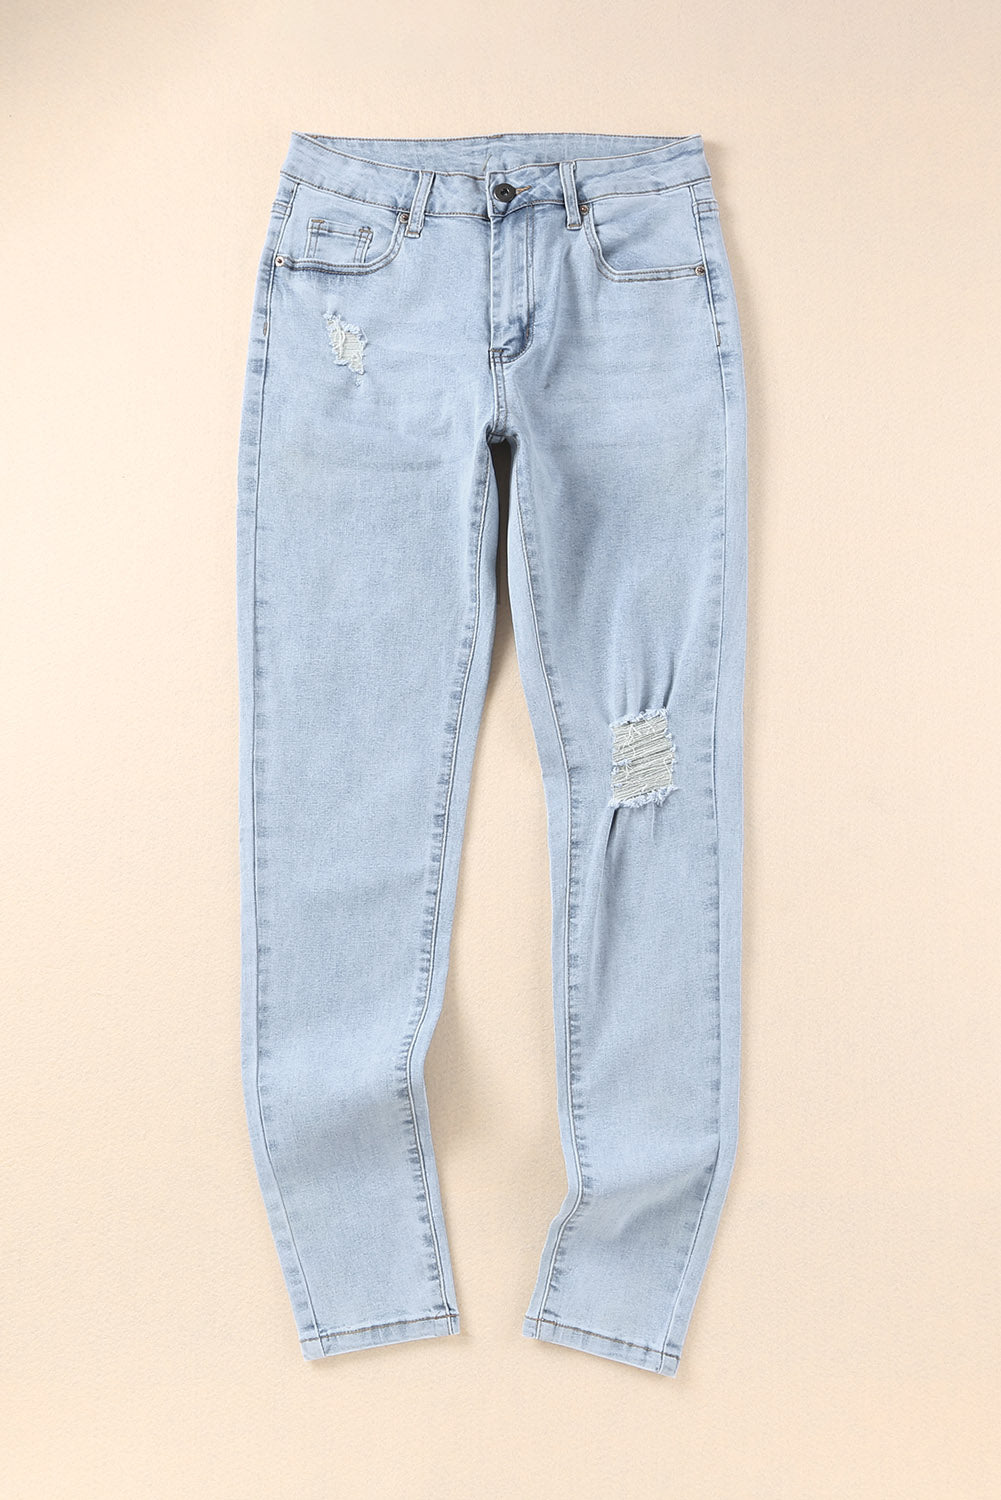 Sky Blue Faded Skinny Jeans with Pockets